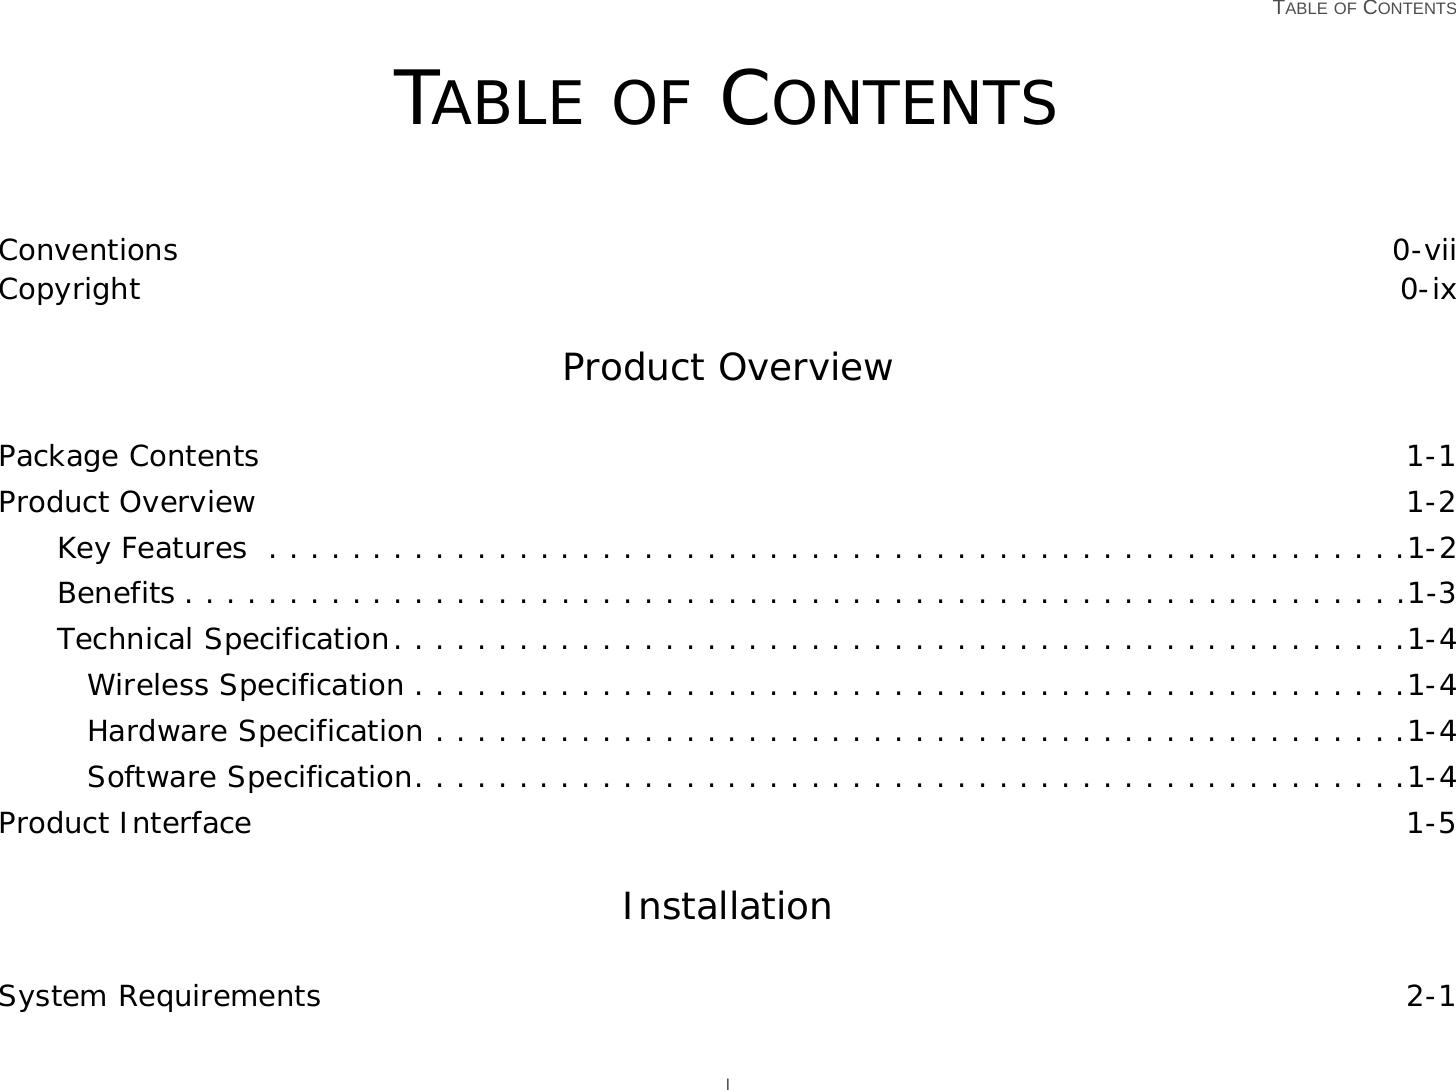   TABLE OF CONTENTS ITABLE OF CONTENTSConventions 0-viiCopyright 0-ixProduct OverviewPackage Contents 1-1Product Overview 1-2Key Features  . . . . . . . . . . . . . . . . . . . . . . . . . . . . . . . . . . . . . . . . . . . . . . . . . . . . . . .1-2Benefits . . . . . . . . . . . . . . . . . . . . . . . . . . . . . . . . . . . . . . . . . . . . . . . . . . . . . . . . . . .1-3Technical Specification. . . . . . . . . . . . . . . . . . . . . . . . . . . . . . . . . . . . . . . . . . . . . . . . .1-4Wireless Specification . . . . . . . . . . . . . . . . . . . . . . . . . . . . . . . . . . . . . . . . . . . . . . . .1-4Hardware Specification . . . . . . . . . . . . . . . . . . . . . . . . . . . . . . . . . . . . . . . . . . . . . . .1-4Software Specification. . . . . . . . . . . . . . . . . . . . . . . . . . . . . . . . . . . . . . . . . . . . . . . .1-4Product Interface 1-5InstallationSystem Requirements 2-1